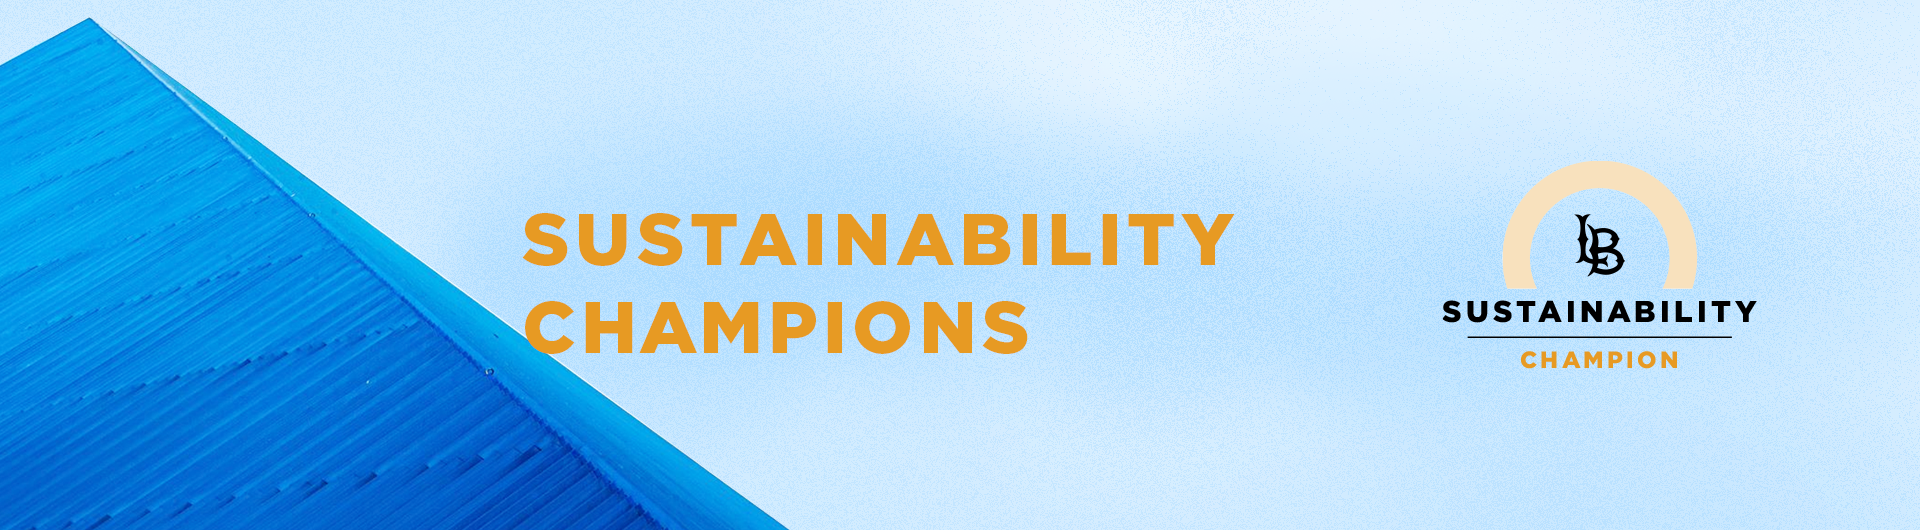 Sustainability Champions Banner New